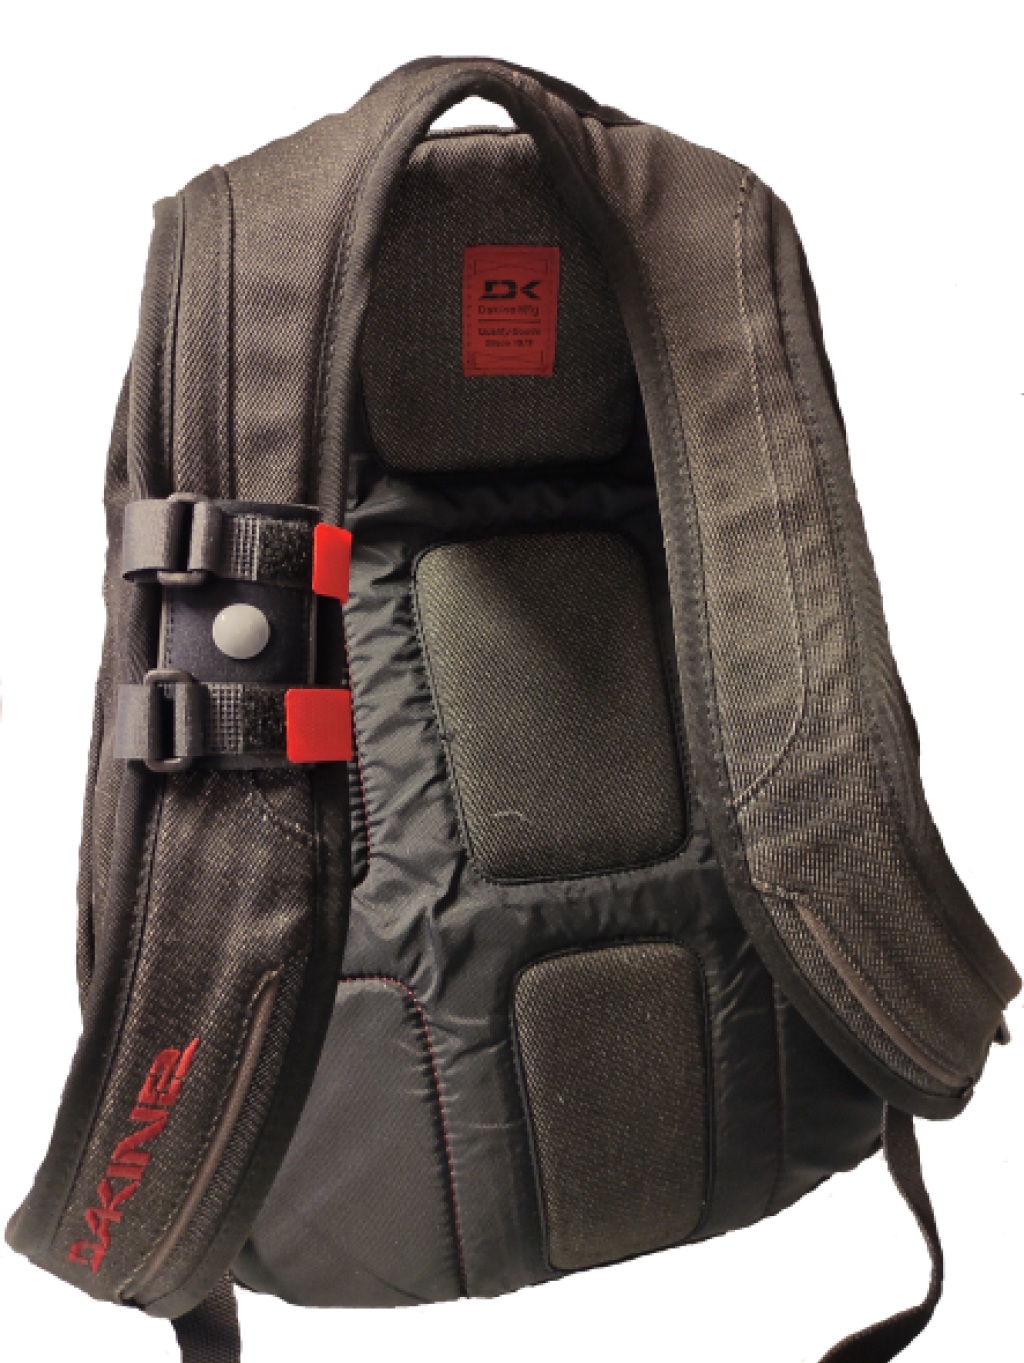 Backpack with emergency button on the strap